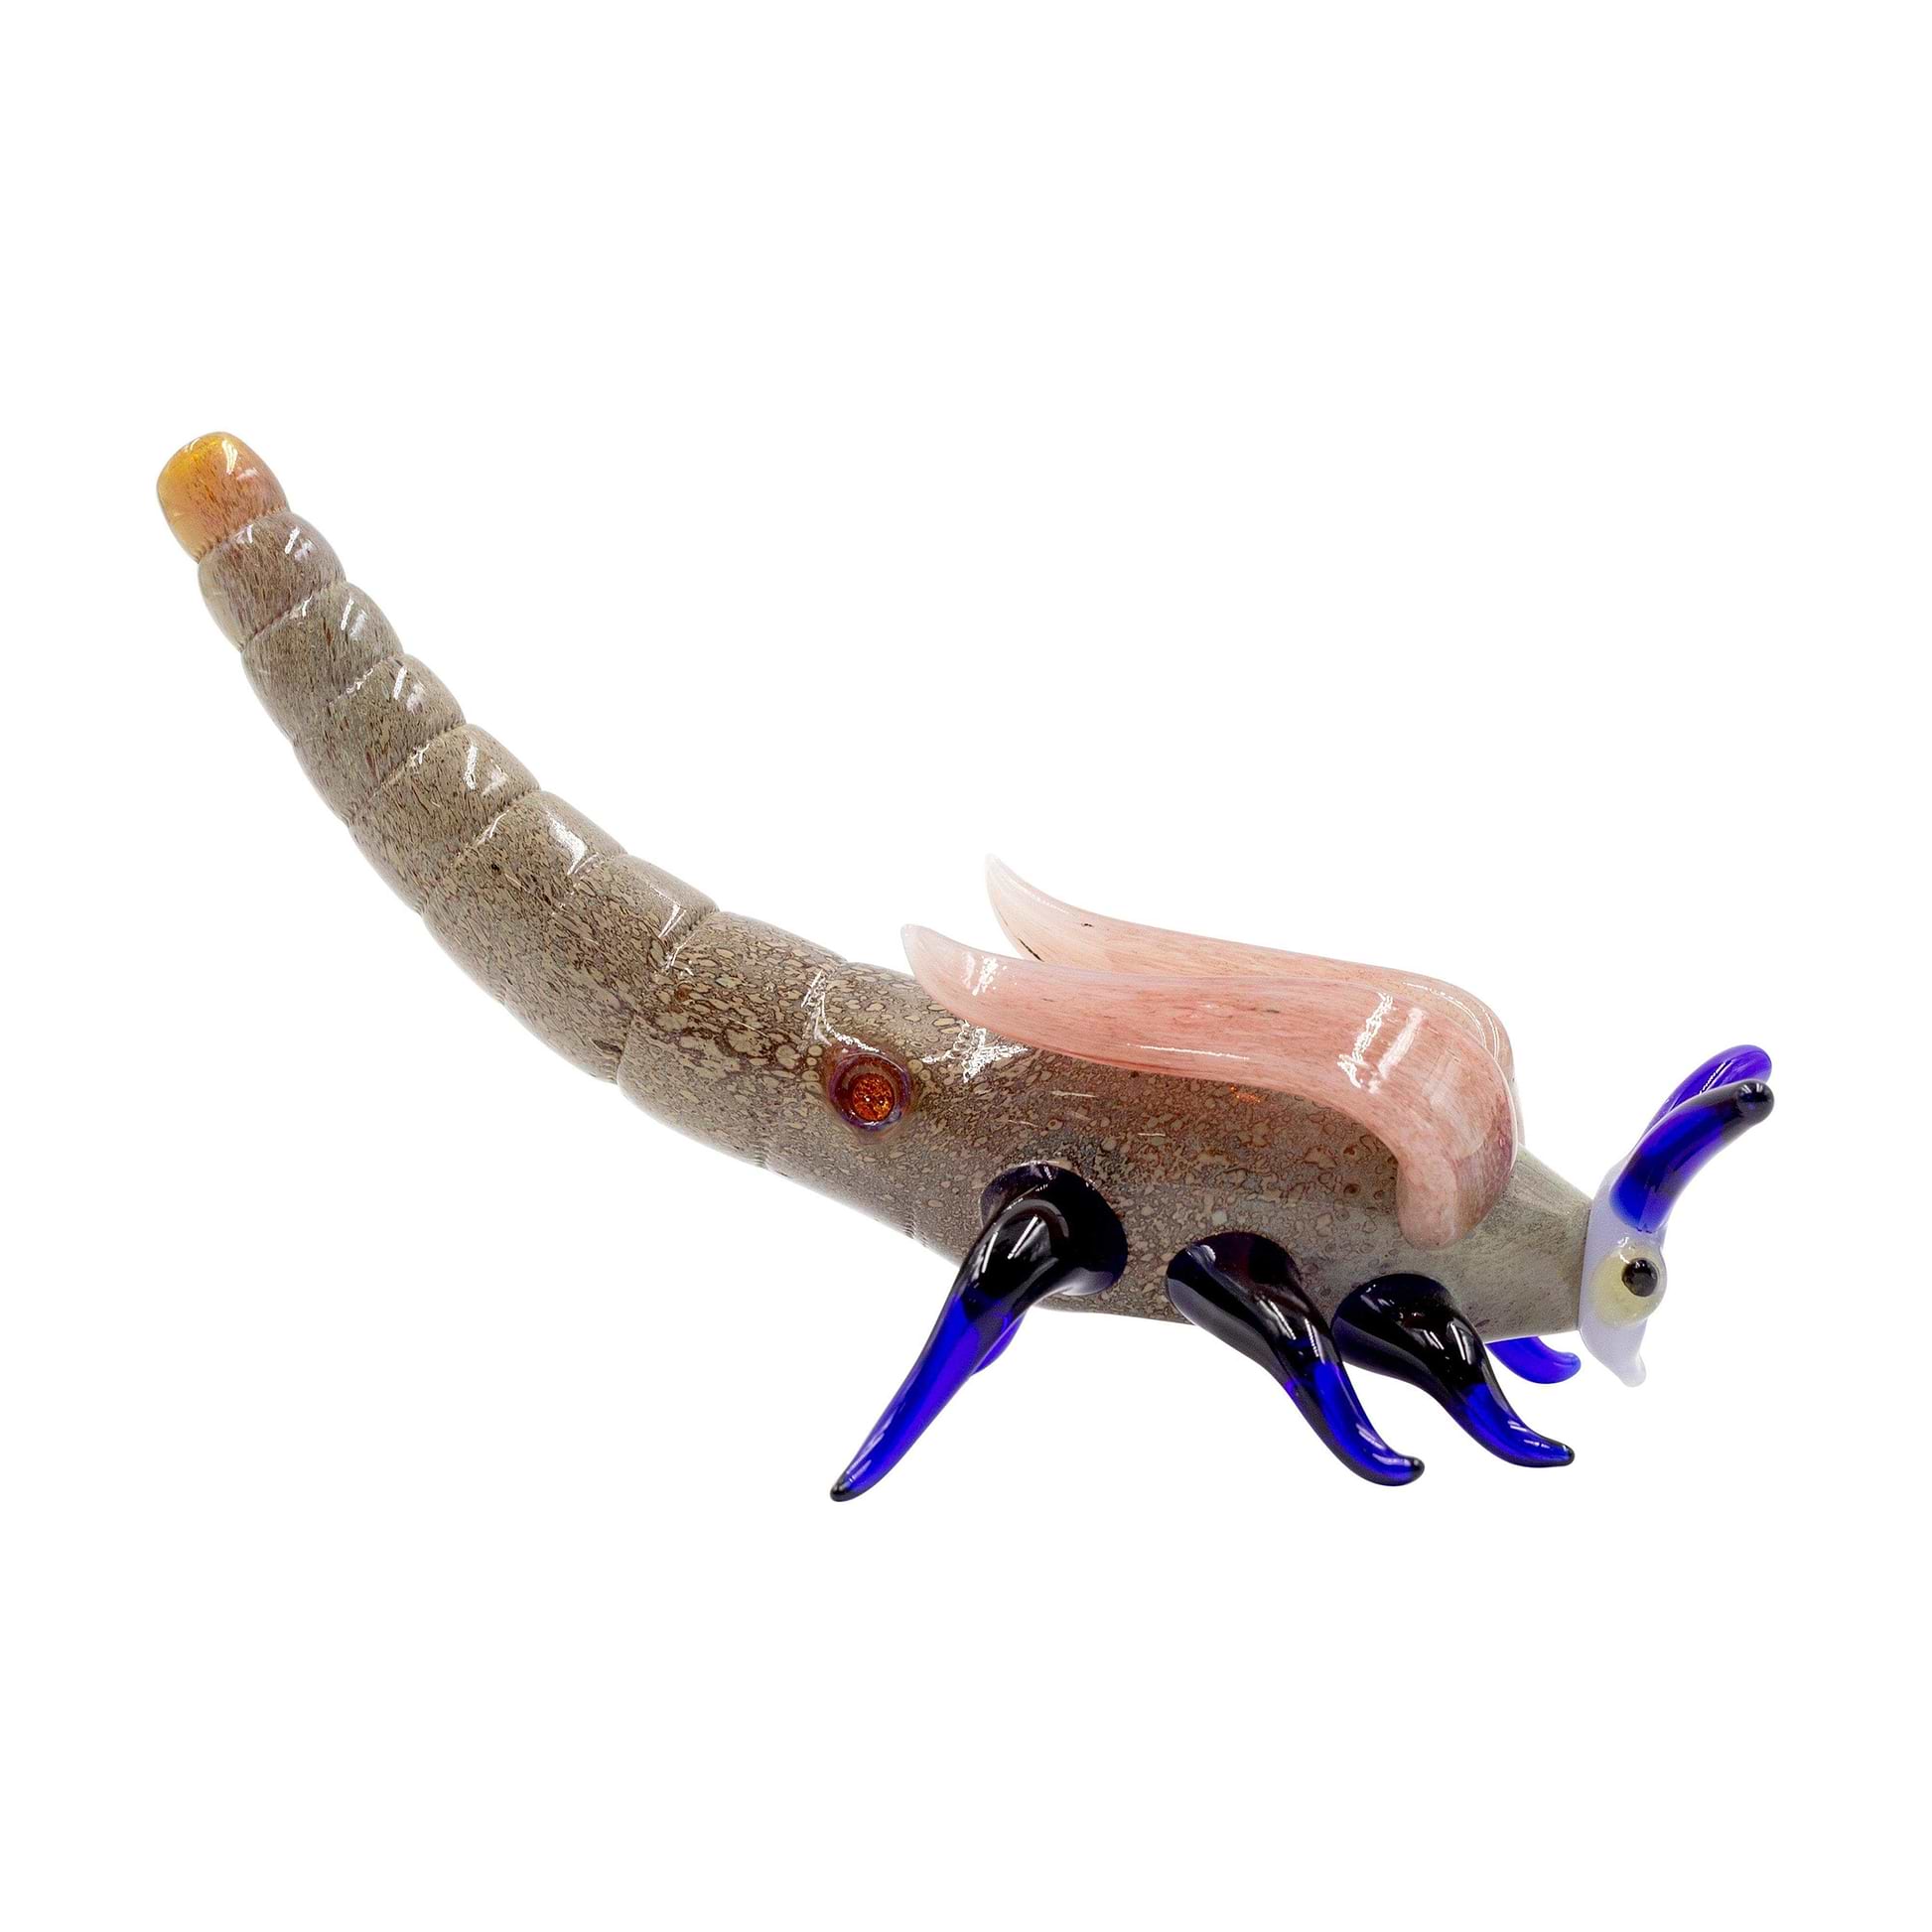 Dope 6-inch glass pipe smoking device bowl on belly with the intricate look and shape of a dragonfly